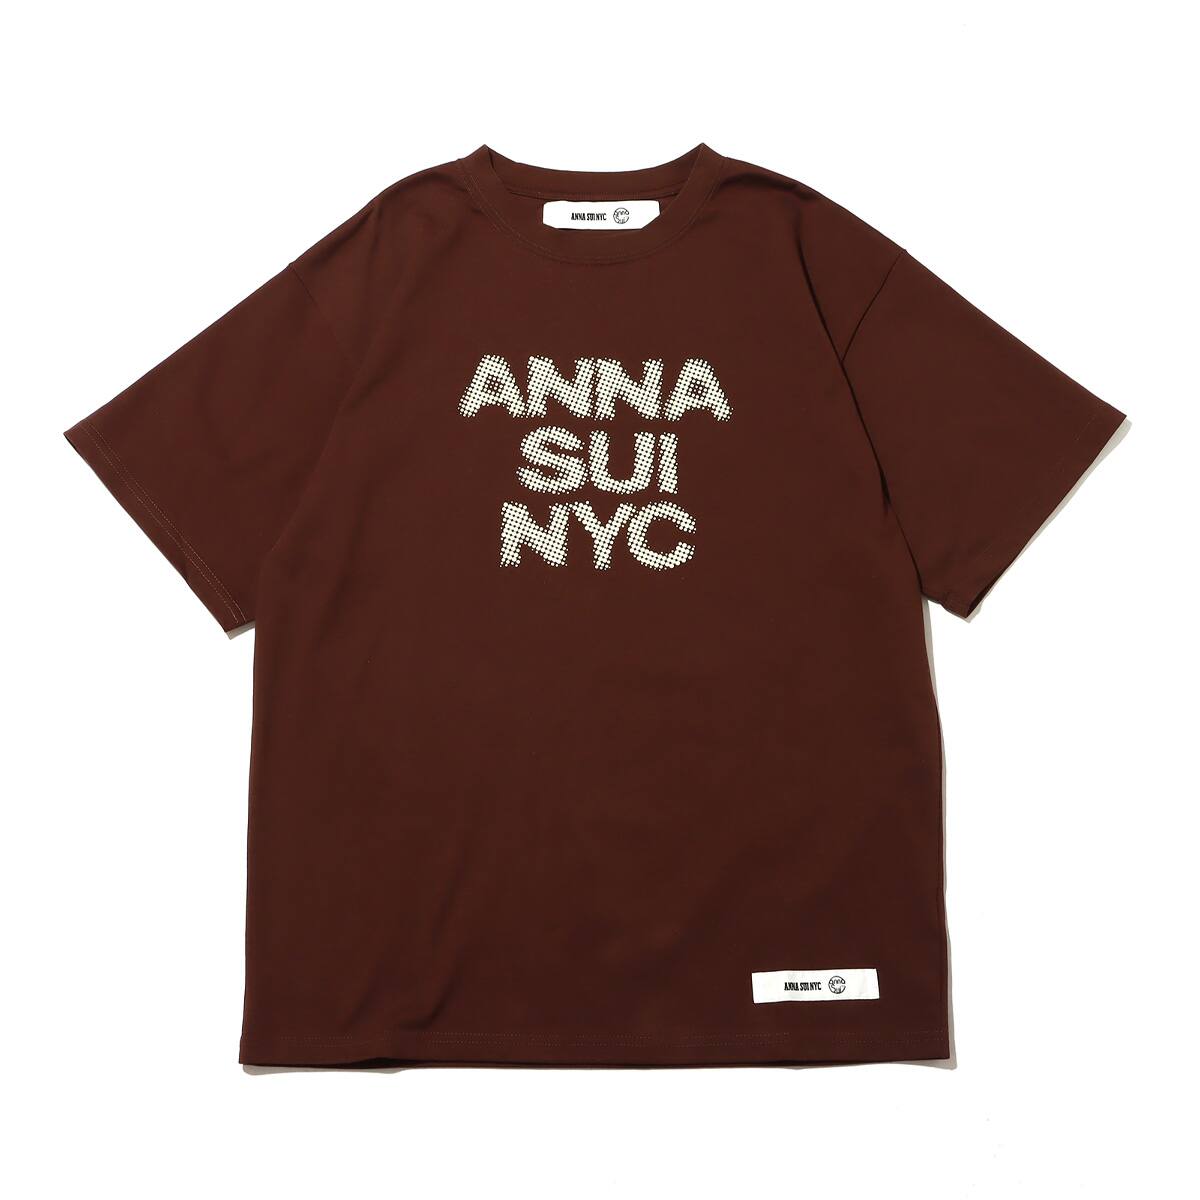 ANNA SUI NYC 発泡 ロゴTシャツ BROWN 22FA-I_photo_large